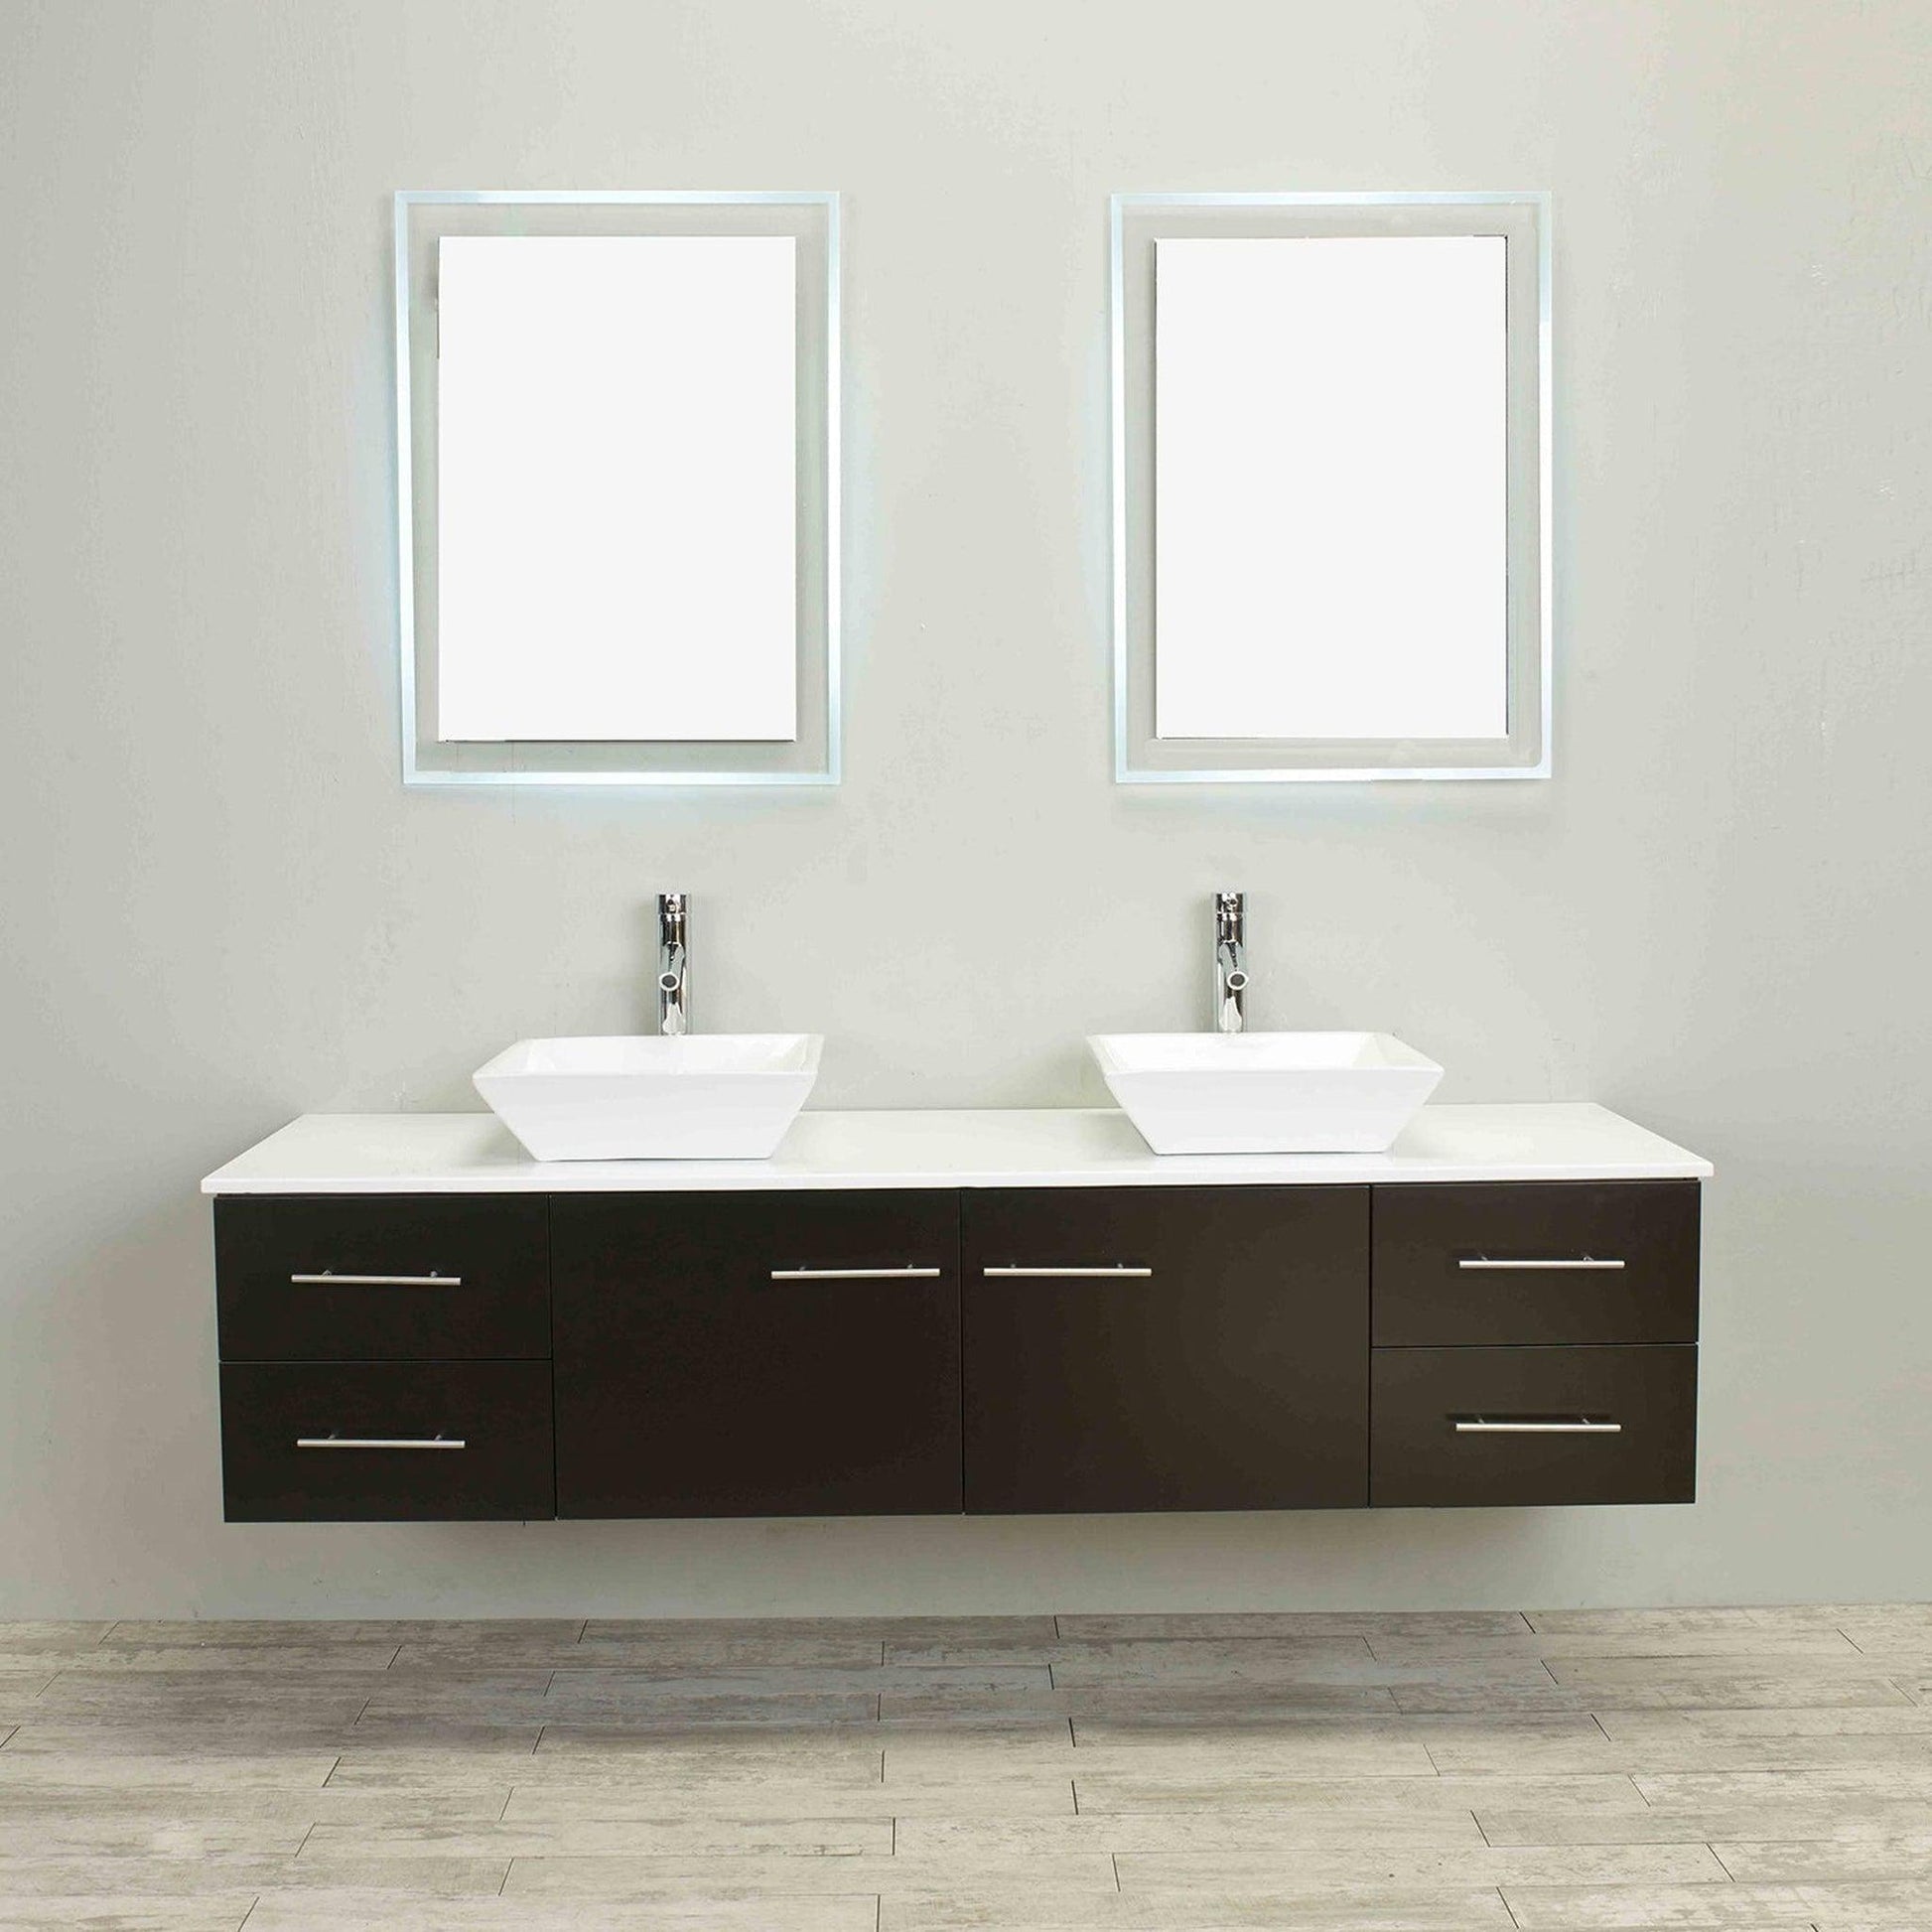 Eviva Totti Wave 72" x 16" Espresso Wall-Mounted Bathroom Vanity With White Man-Made Stone Countertop and Double Porcelain Sink